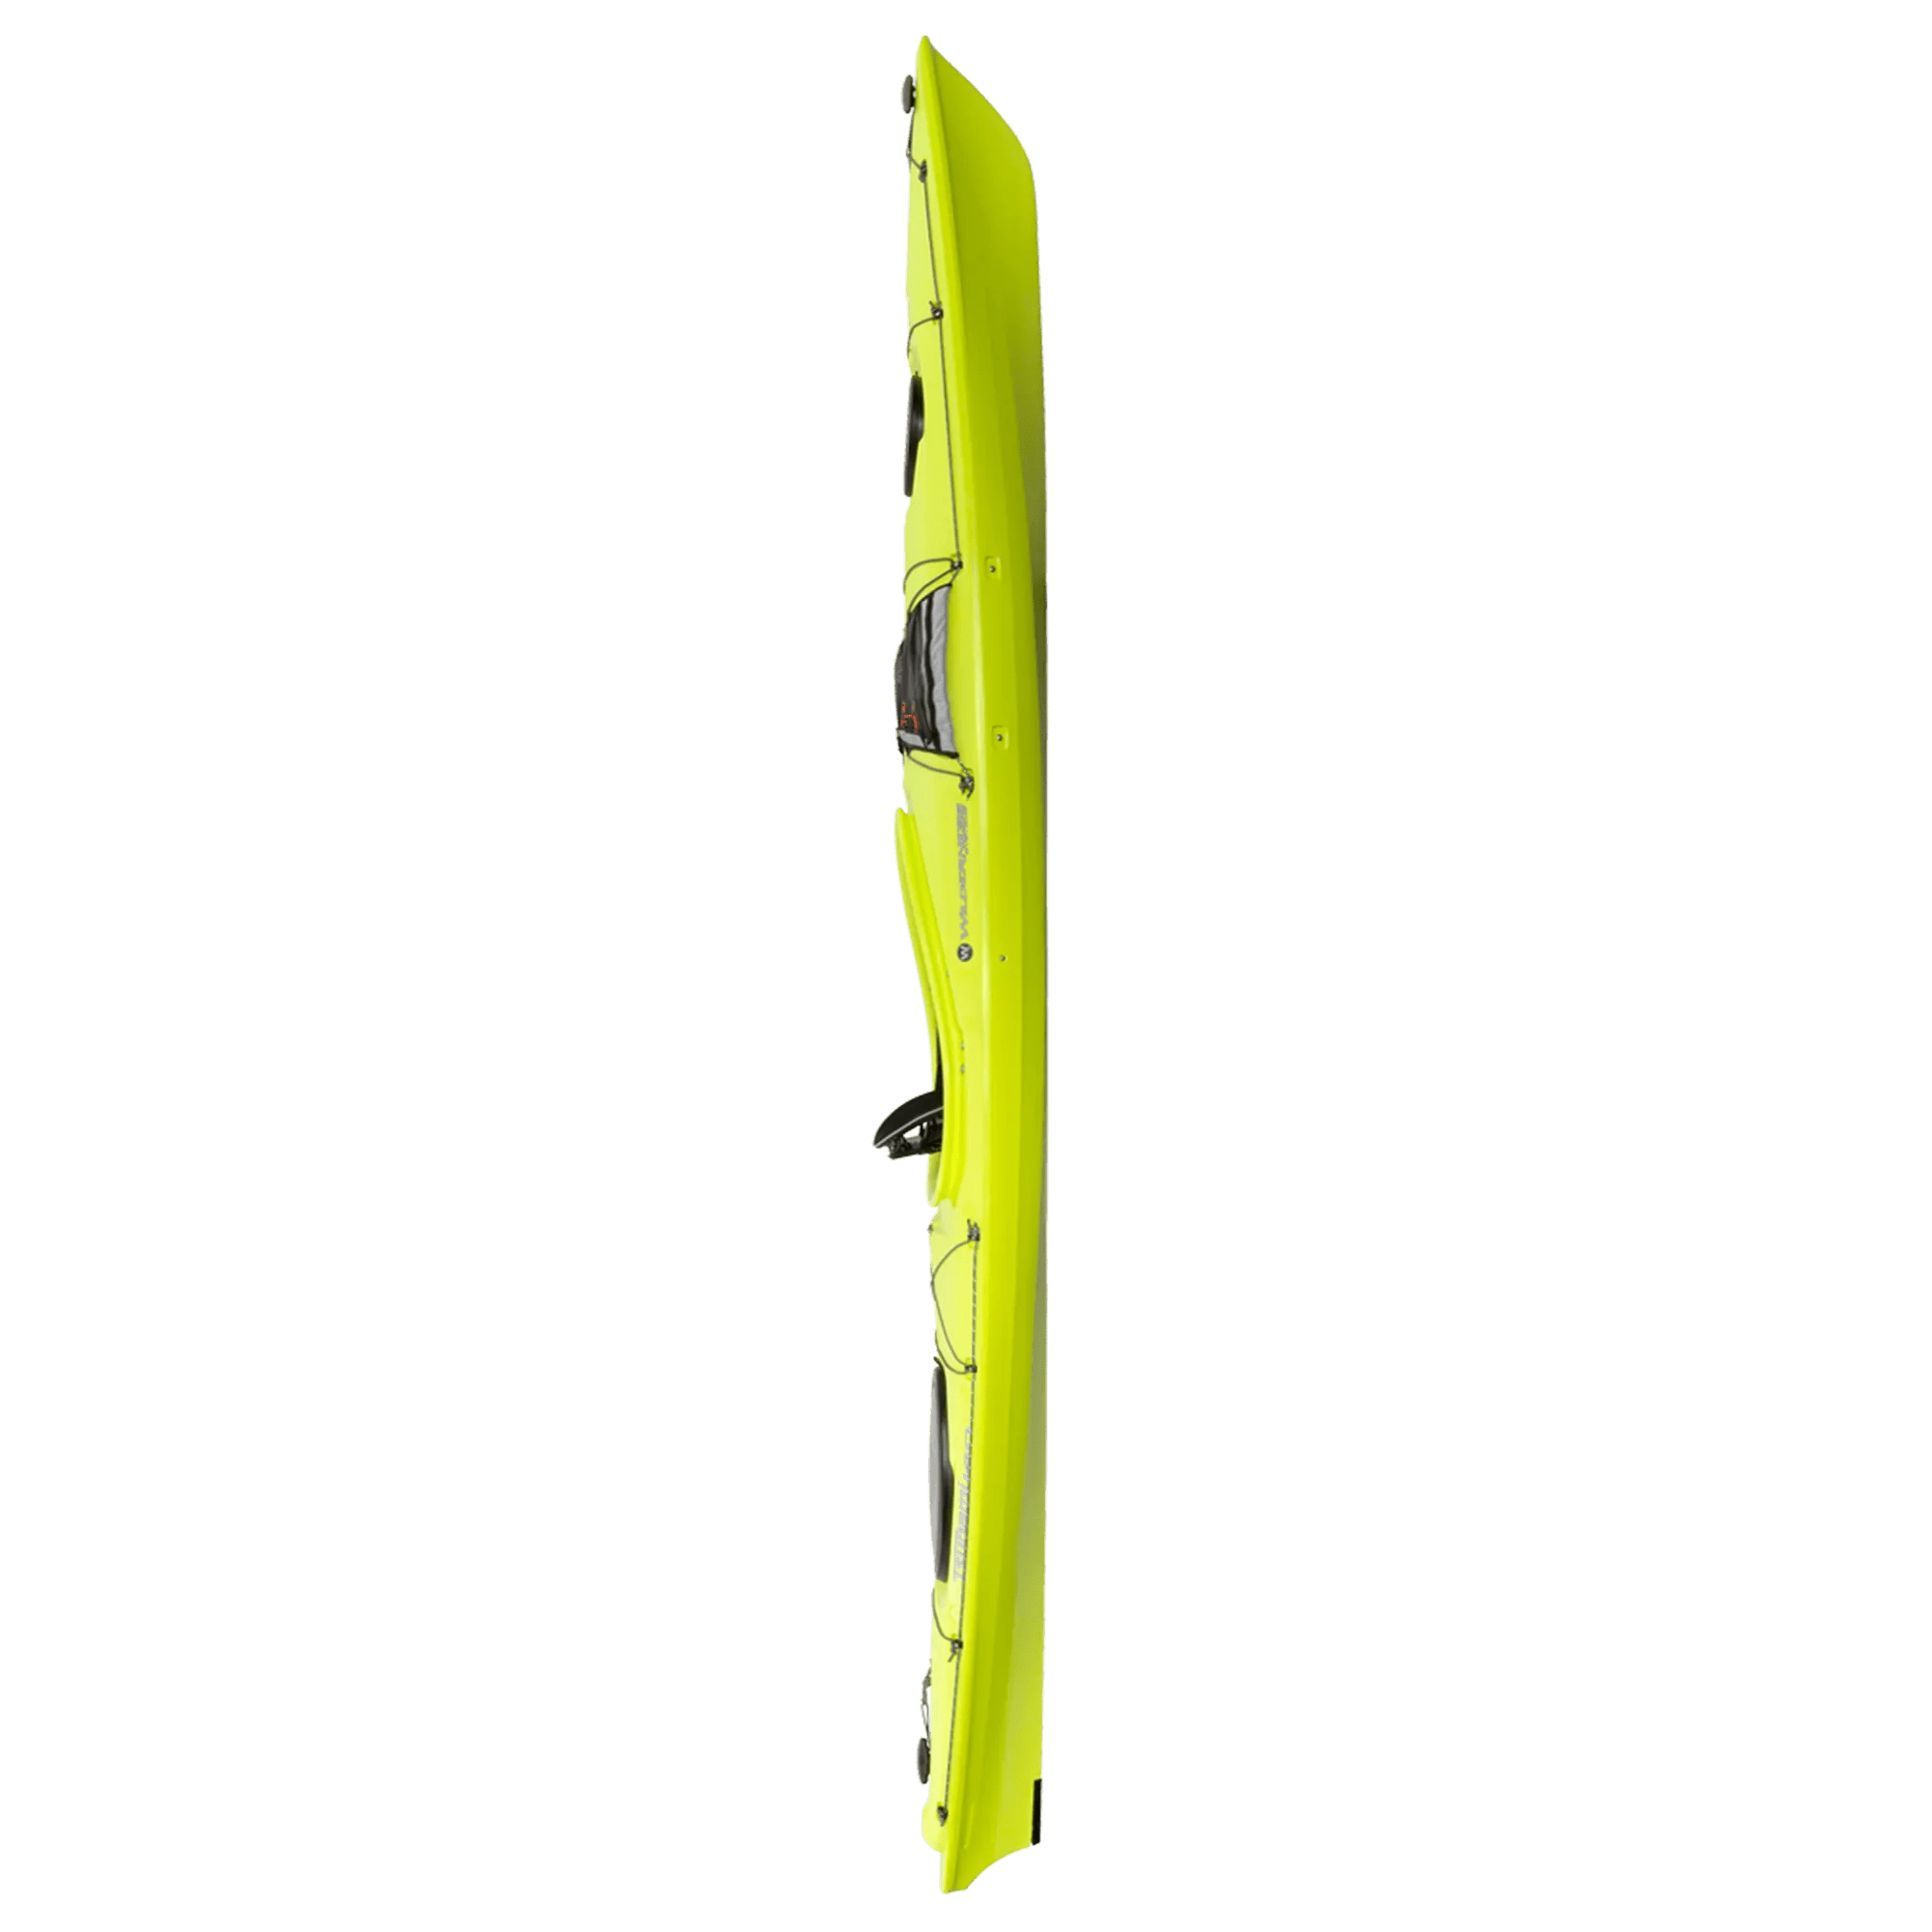 WILDERNESS SYSTEMS - Tsunami 140 Day Touring Kayak - Discontinued color/model - Yellow - 9720408180 - SIDE